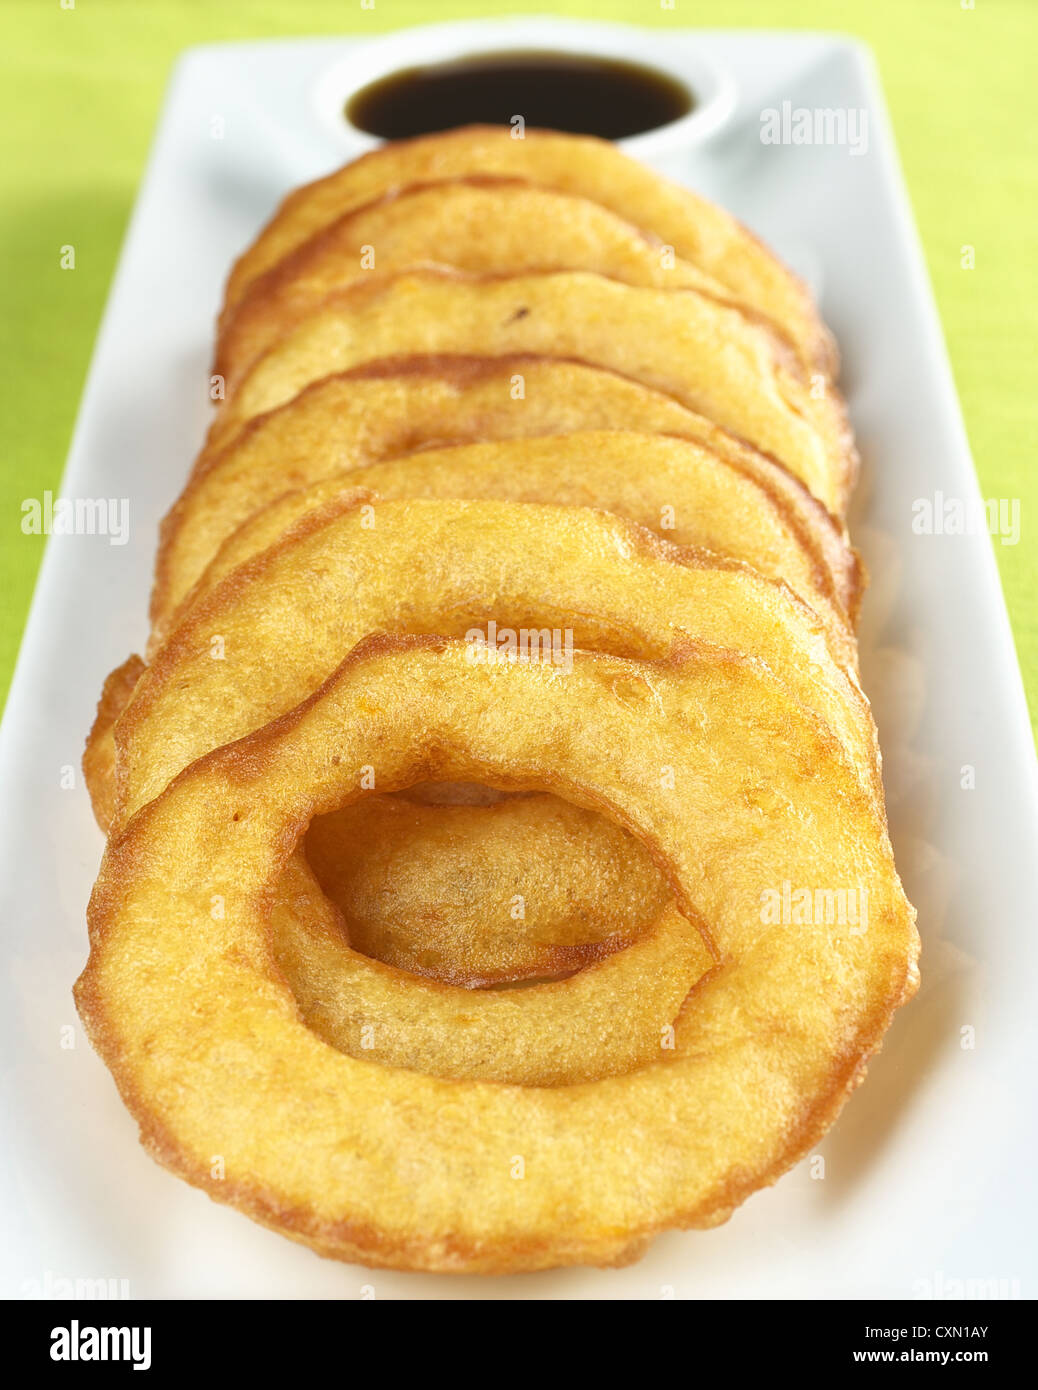 Popular Peruvian dessert called Picarones made from squash and sweet potato and served with Chancaca syrup (kind of honey) Stock Photo